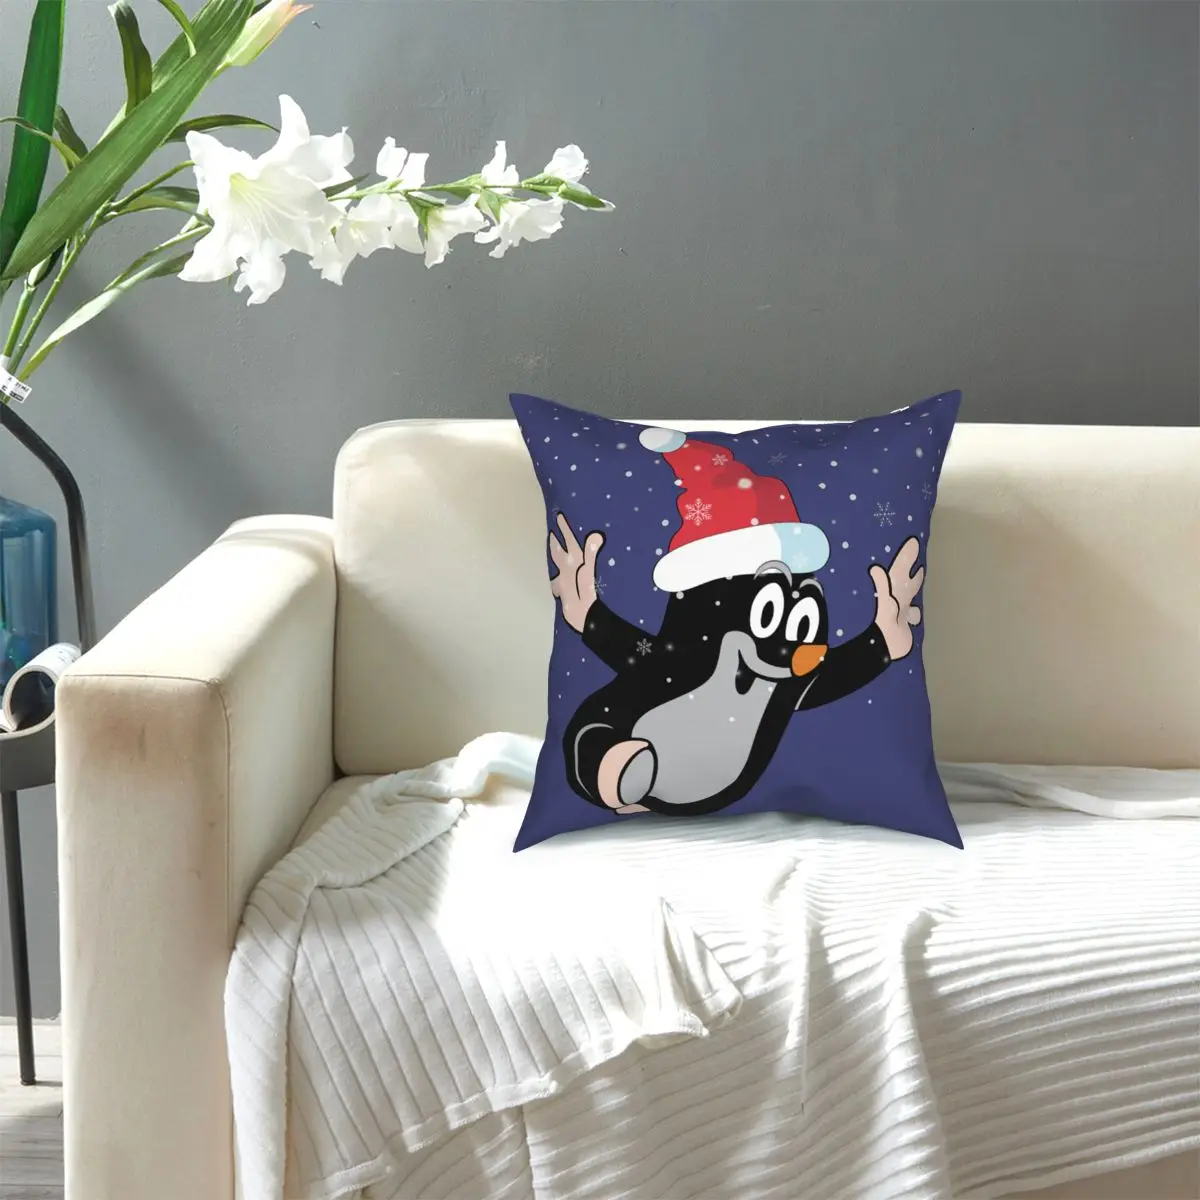 Merry Christmas Mole Pillowcover Home Decorative Cushion Cover Throw Pillow for Car Polyester Double-sided Printing Unique images - 6